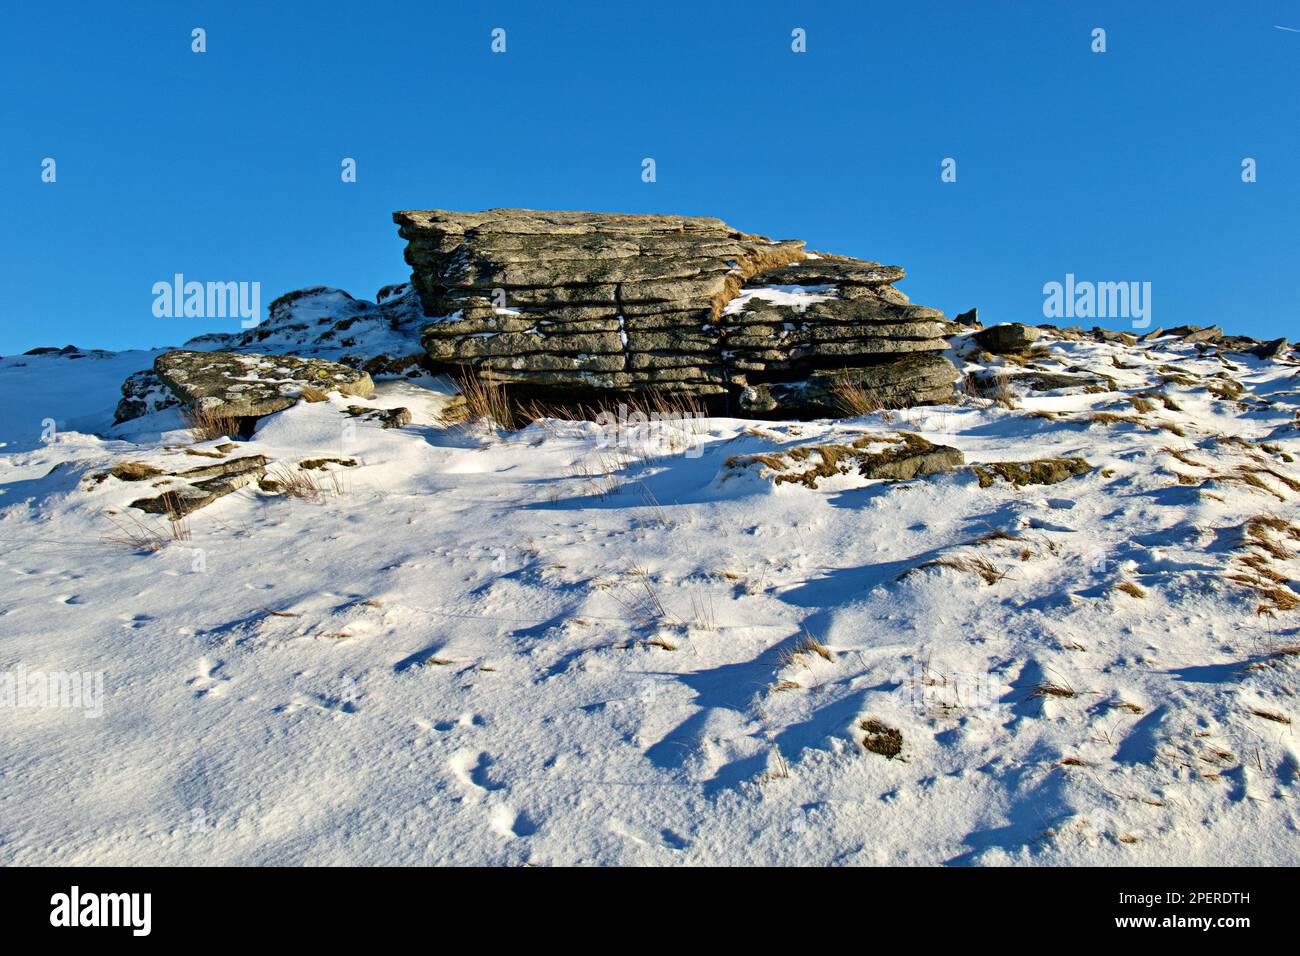 A large rock formation standing on the Yes Tor peak with an idyllic winter landscape in background Stock Photo